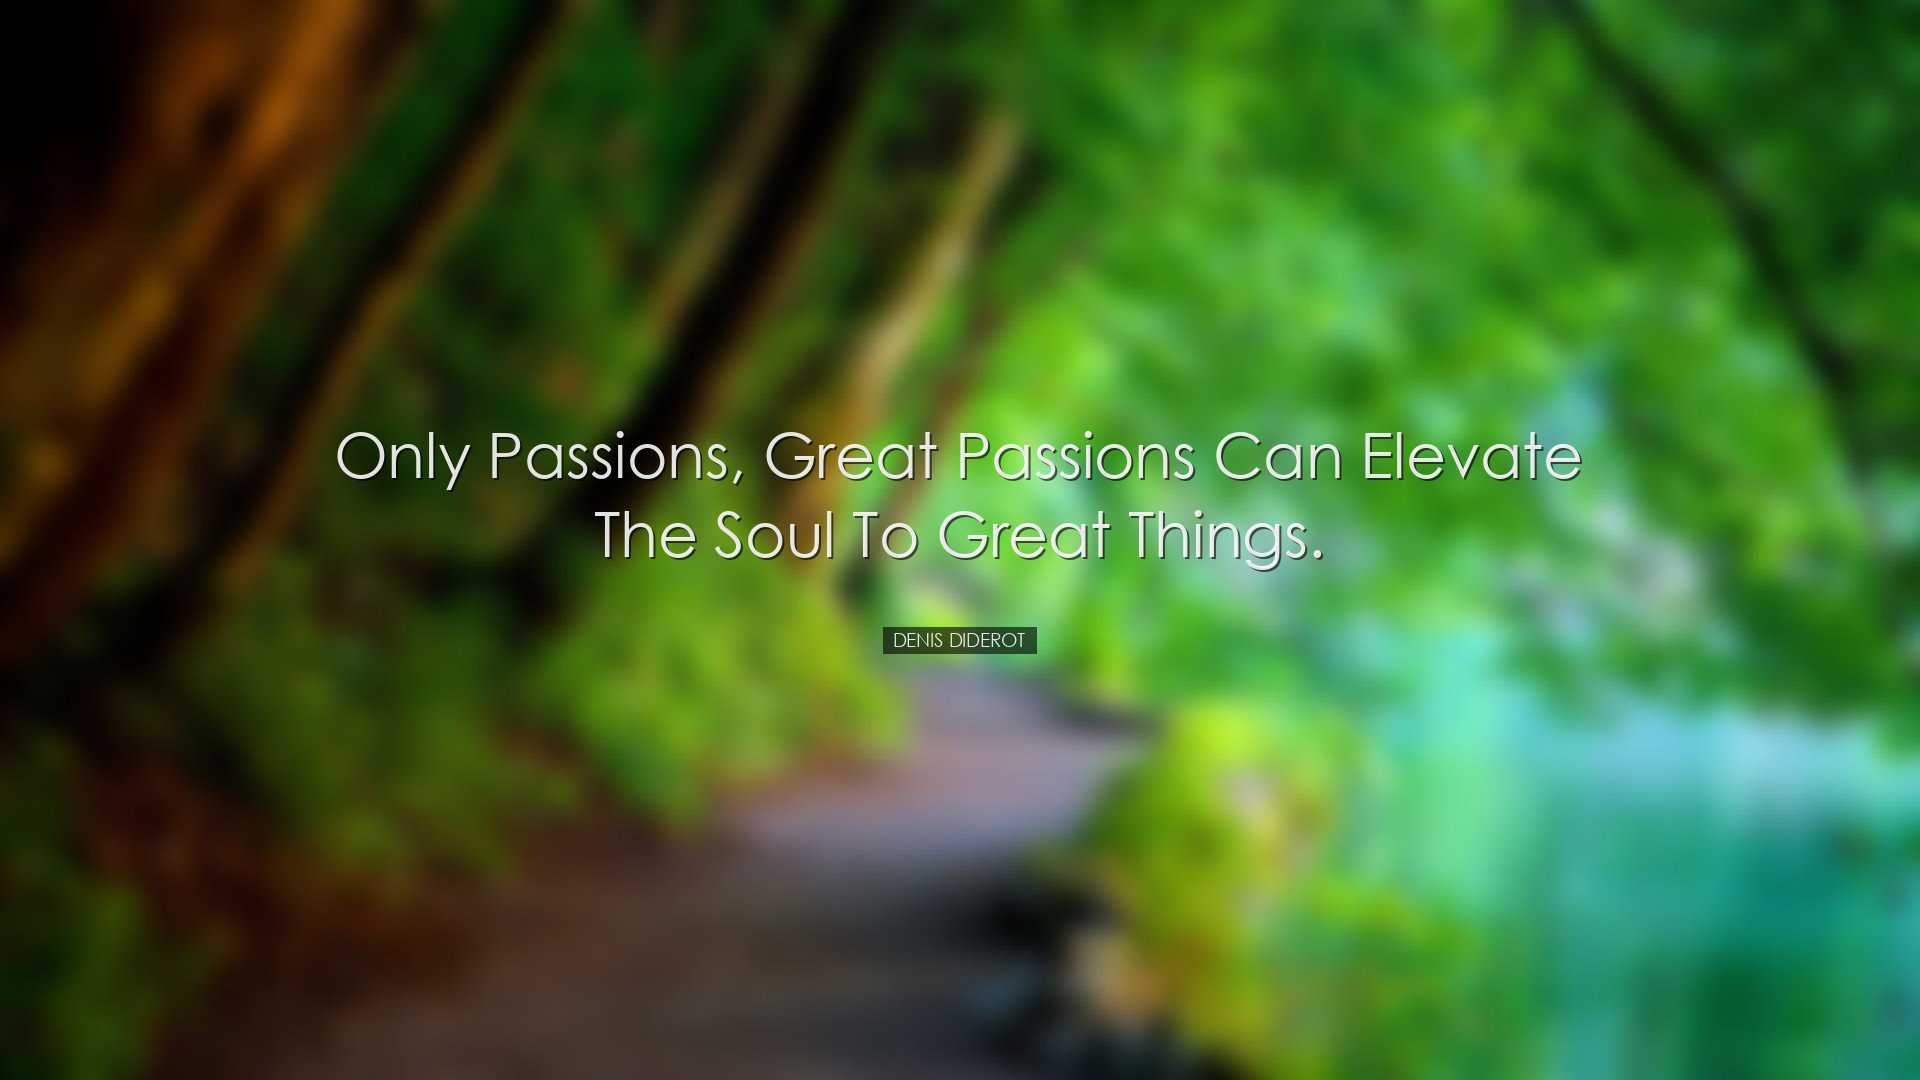 Only passions, great passions can elevate the soul to great things